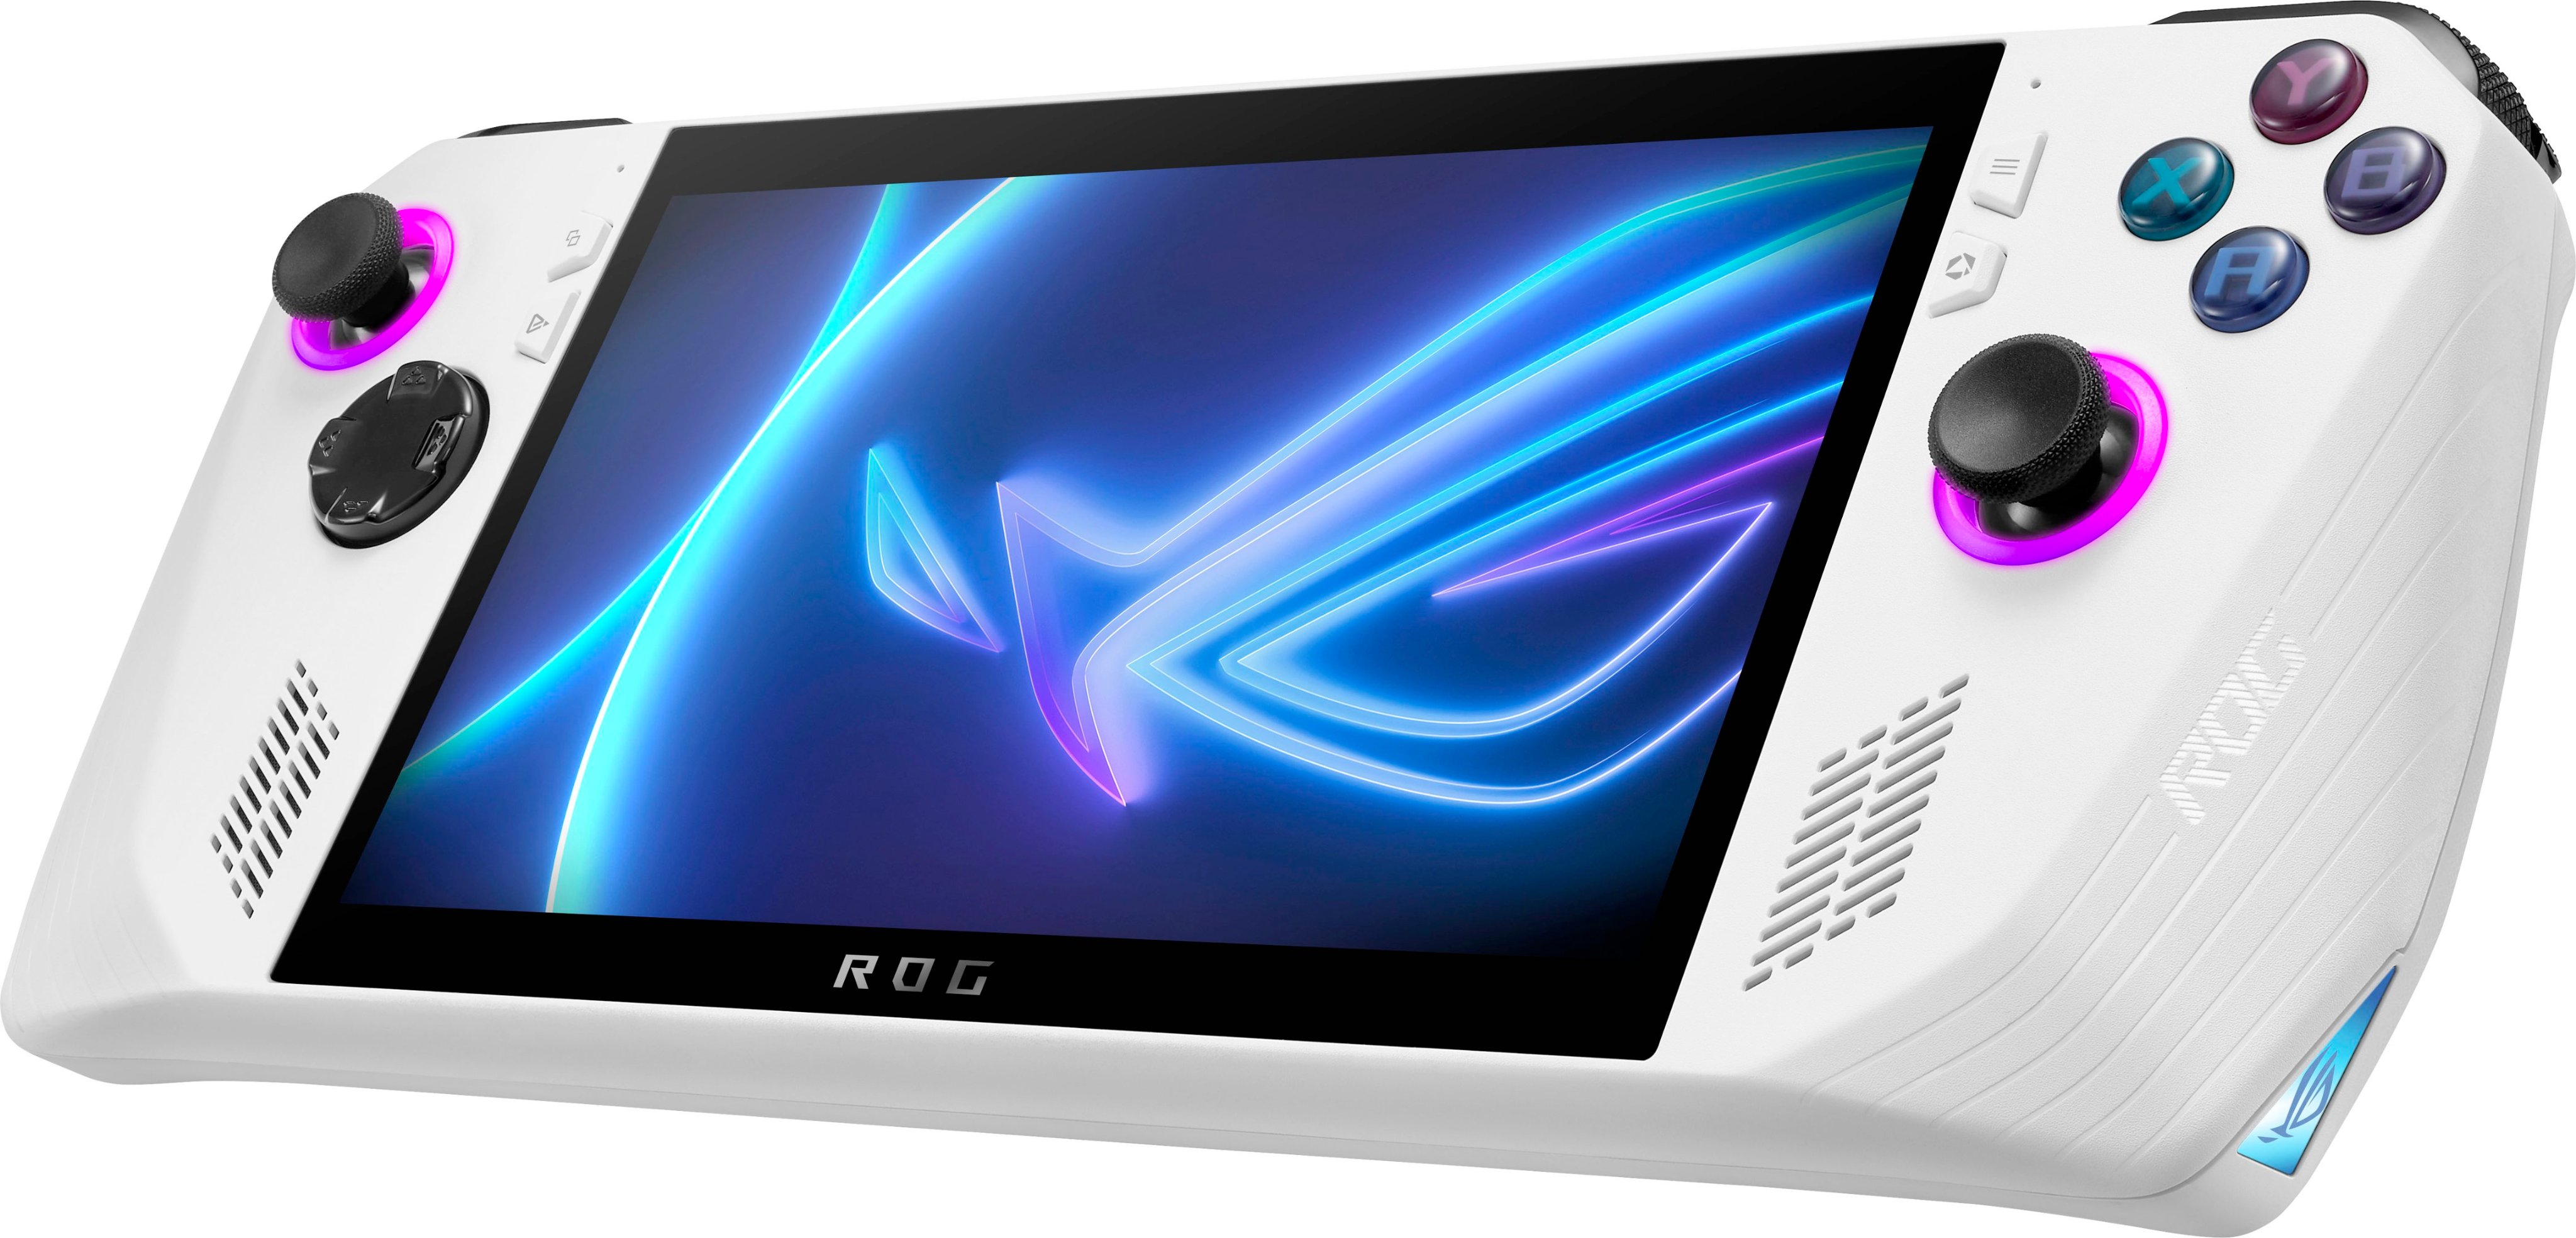 The Asus ROG Ally PC gaming handheld is smaller, lighter and more powerful  than the Steam Deck